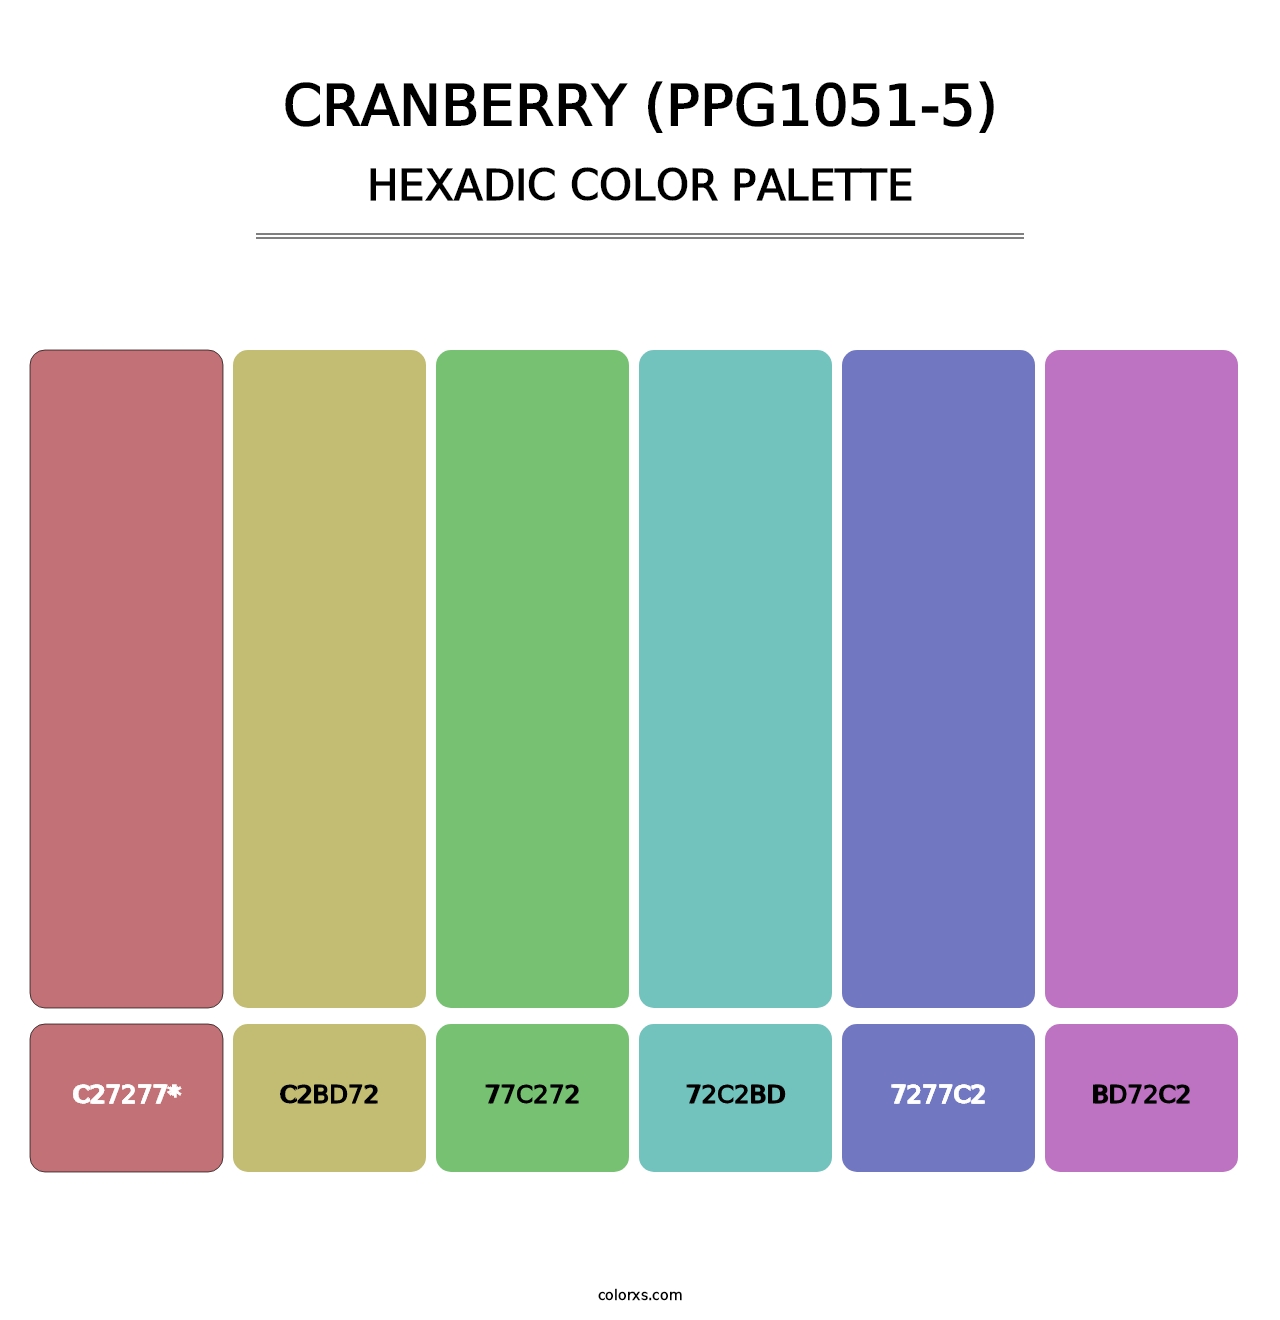 Cranberry (PPG1051-5) - Hexadic Color Palette